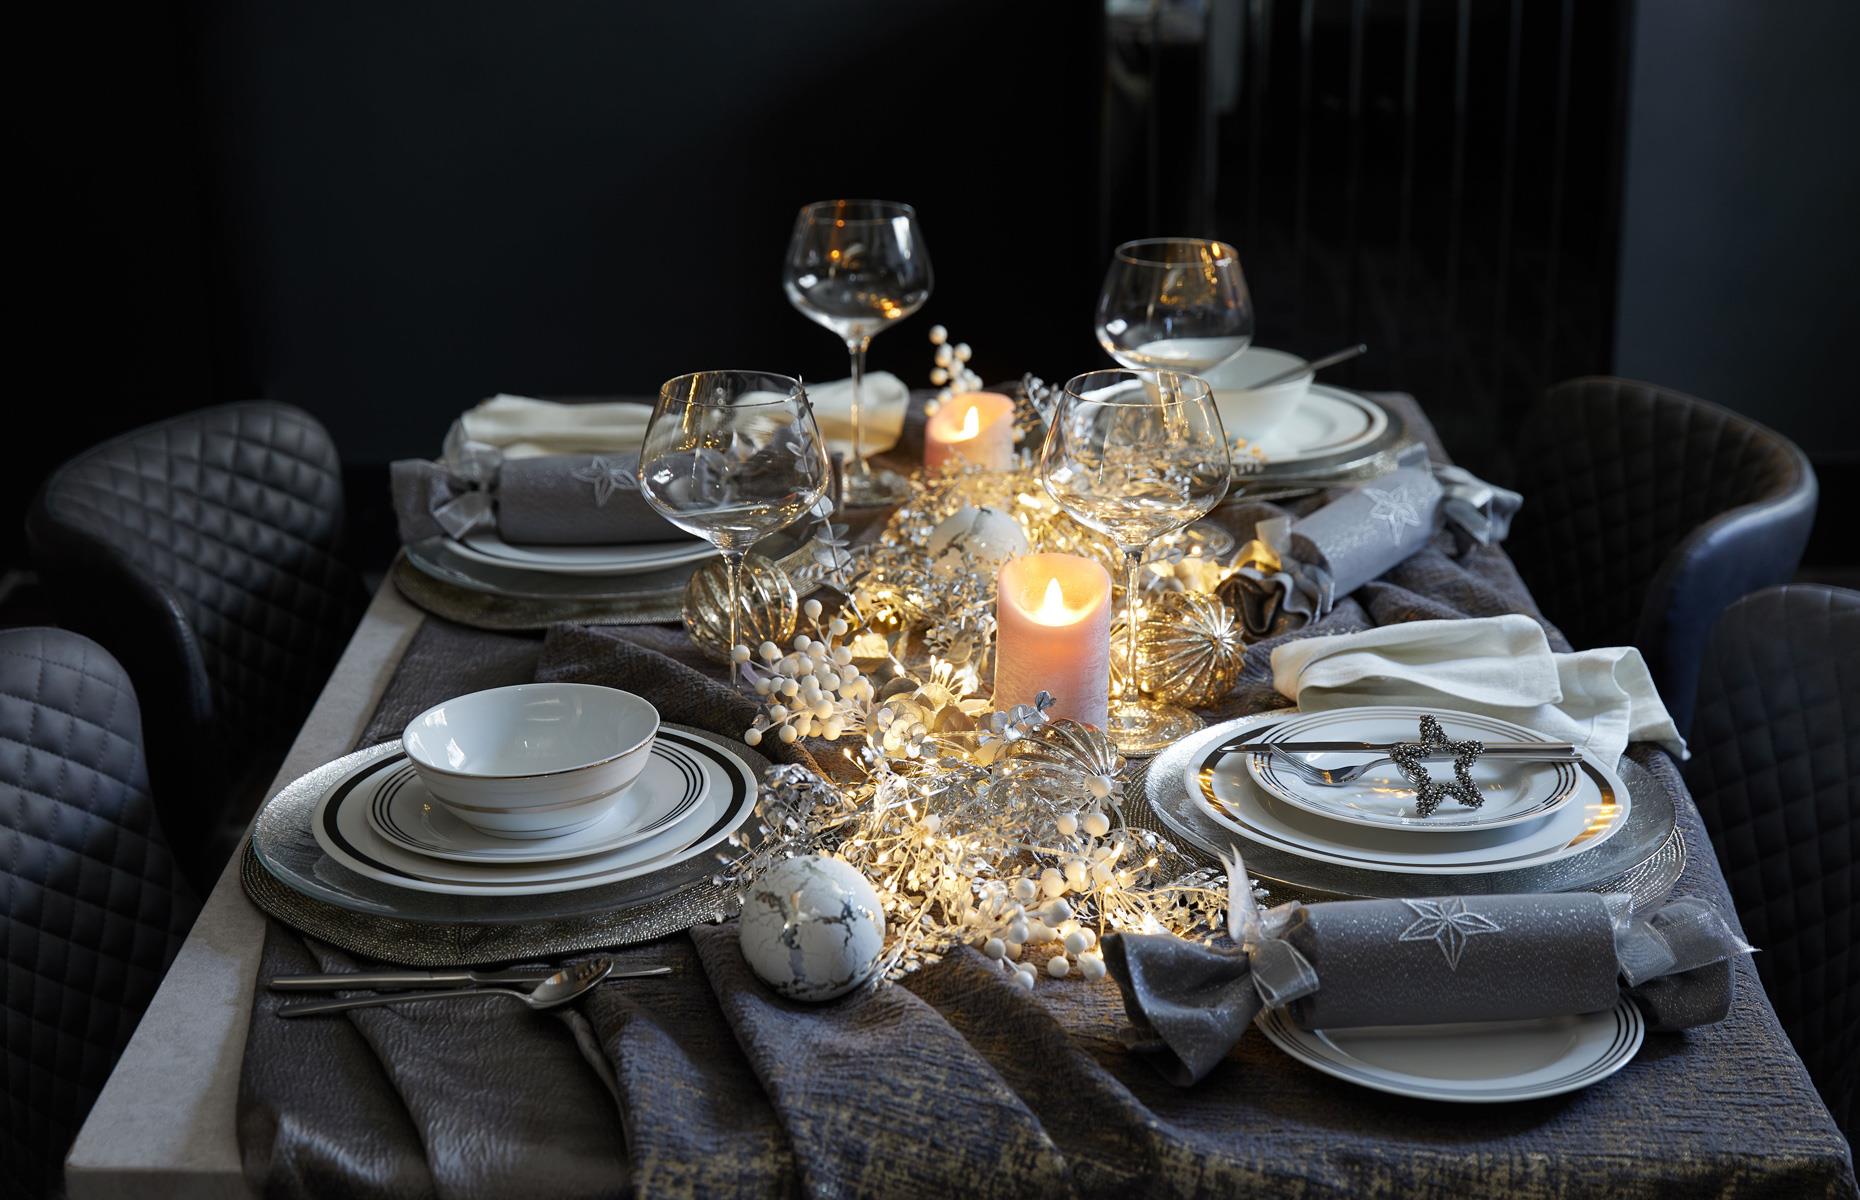 Make the table twinkle